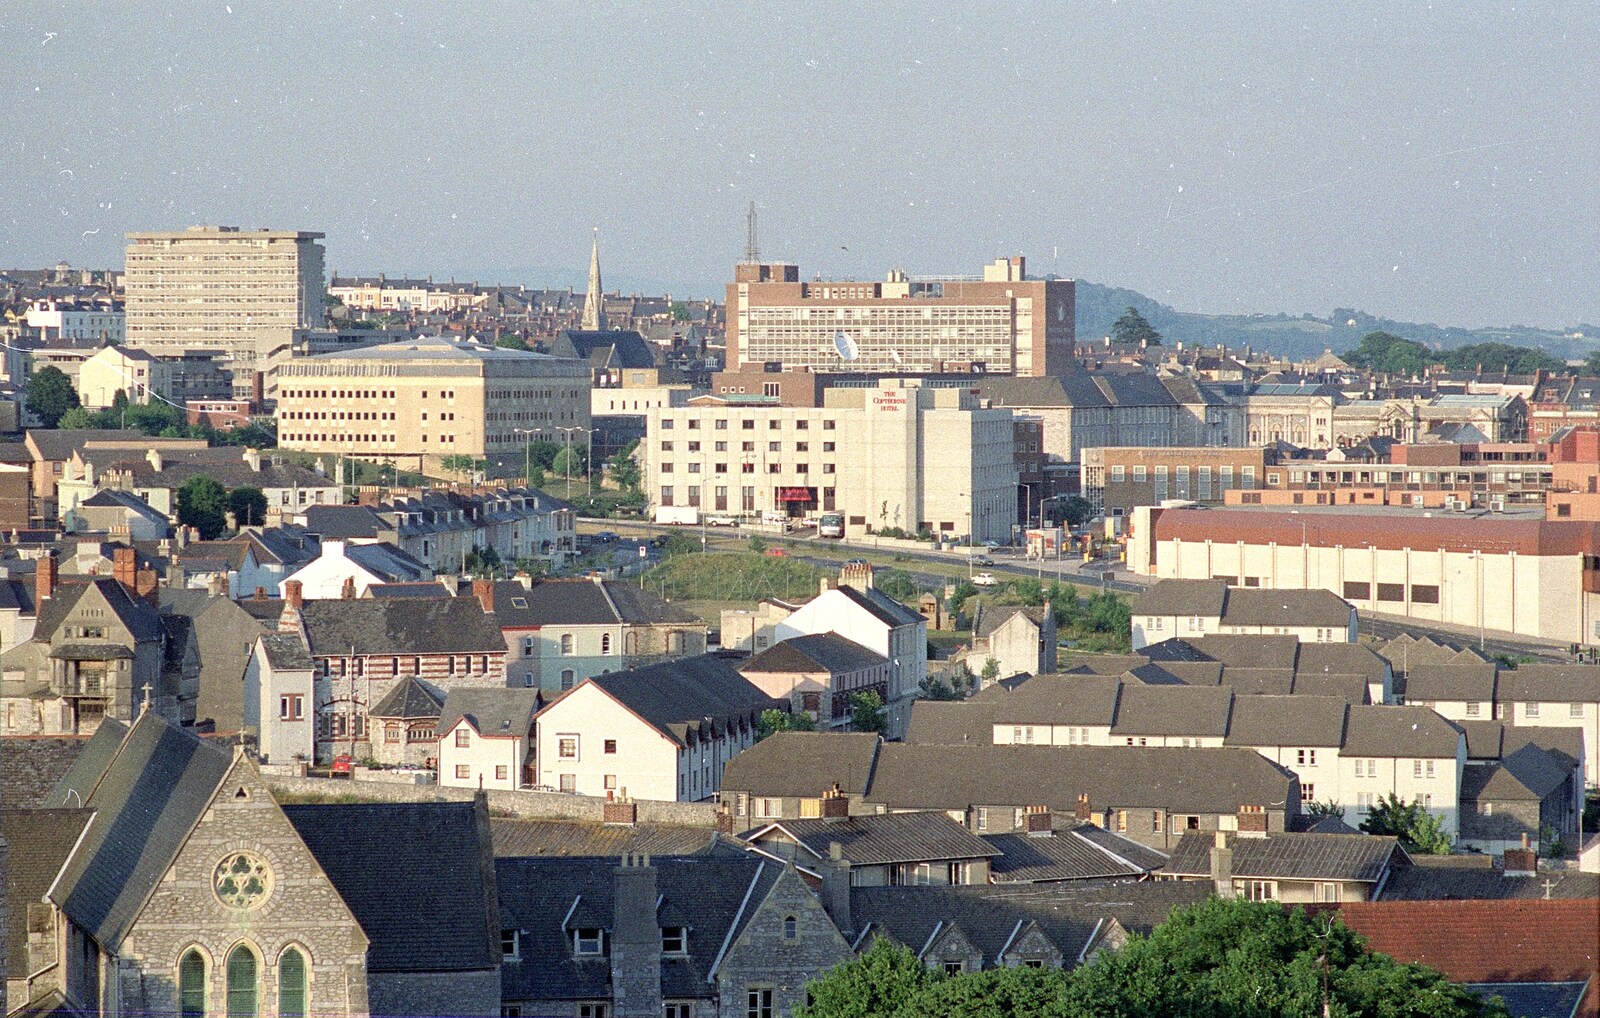 The Polytechnic campus behind the Copthorne from Uni: Views From St. Peter's Church Tower, Wyndham Square, Plymouth, Devon - 15th June 1989